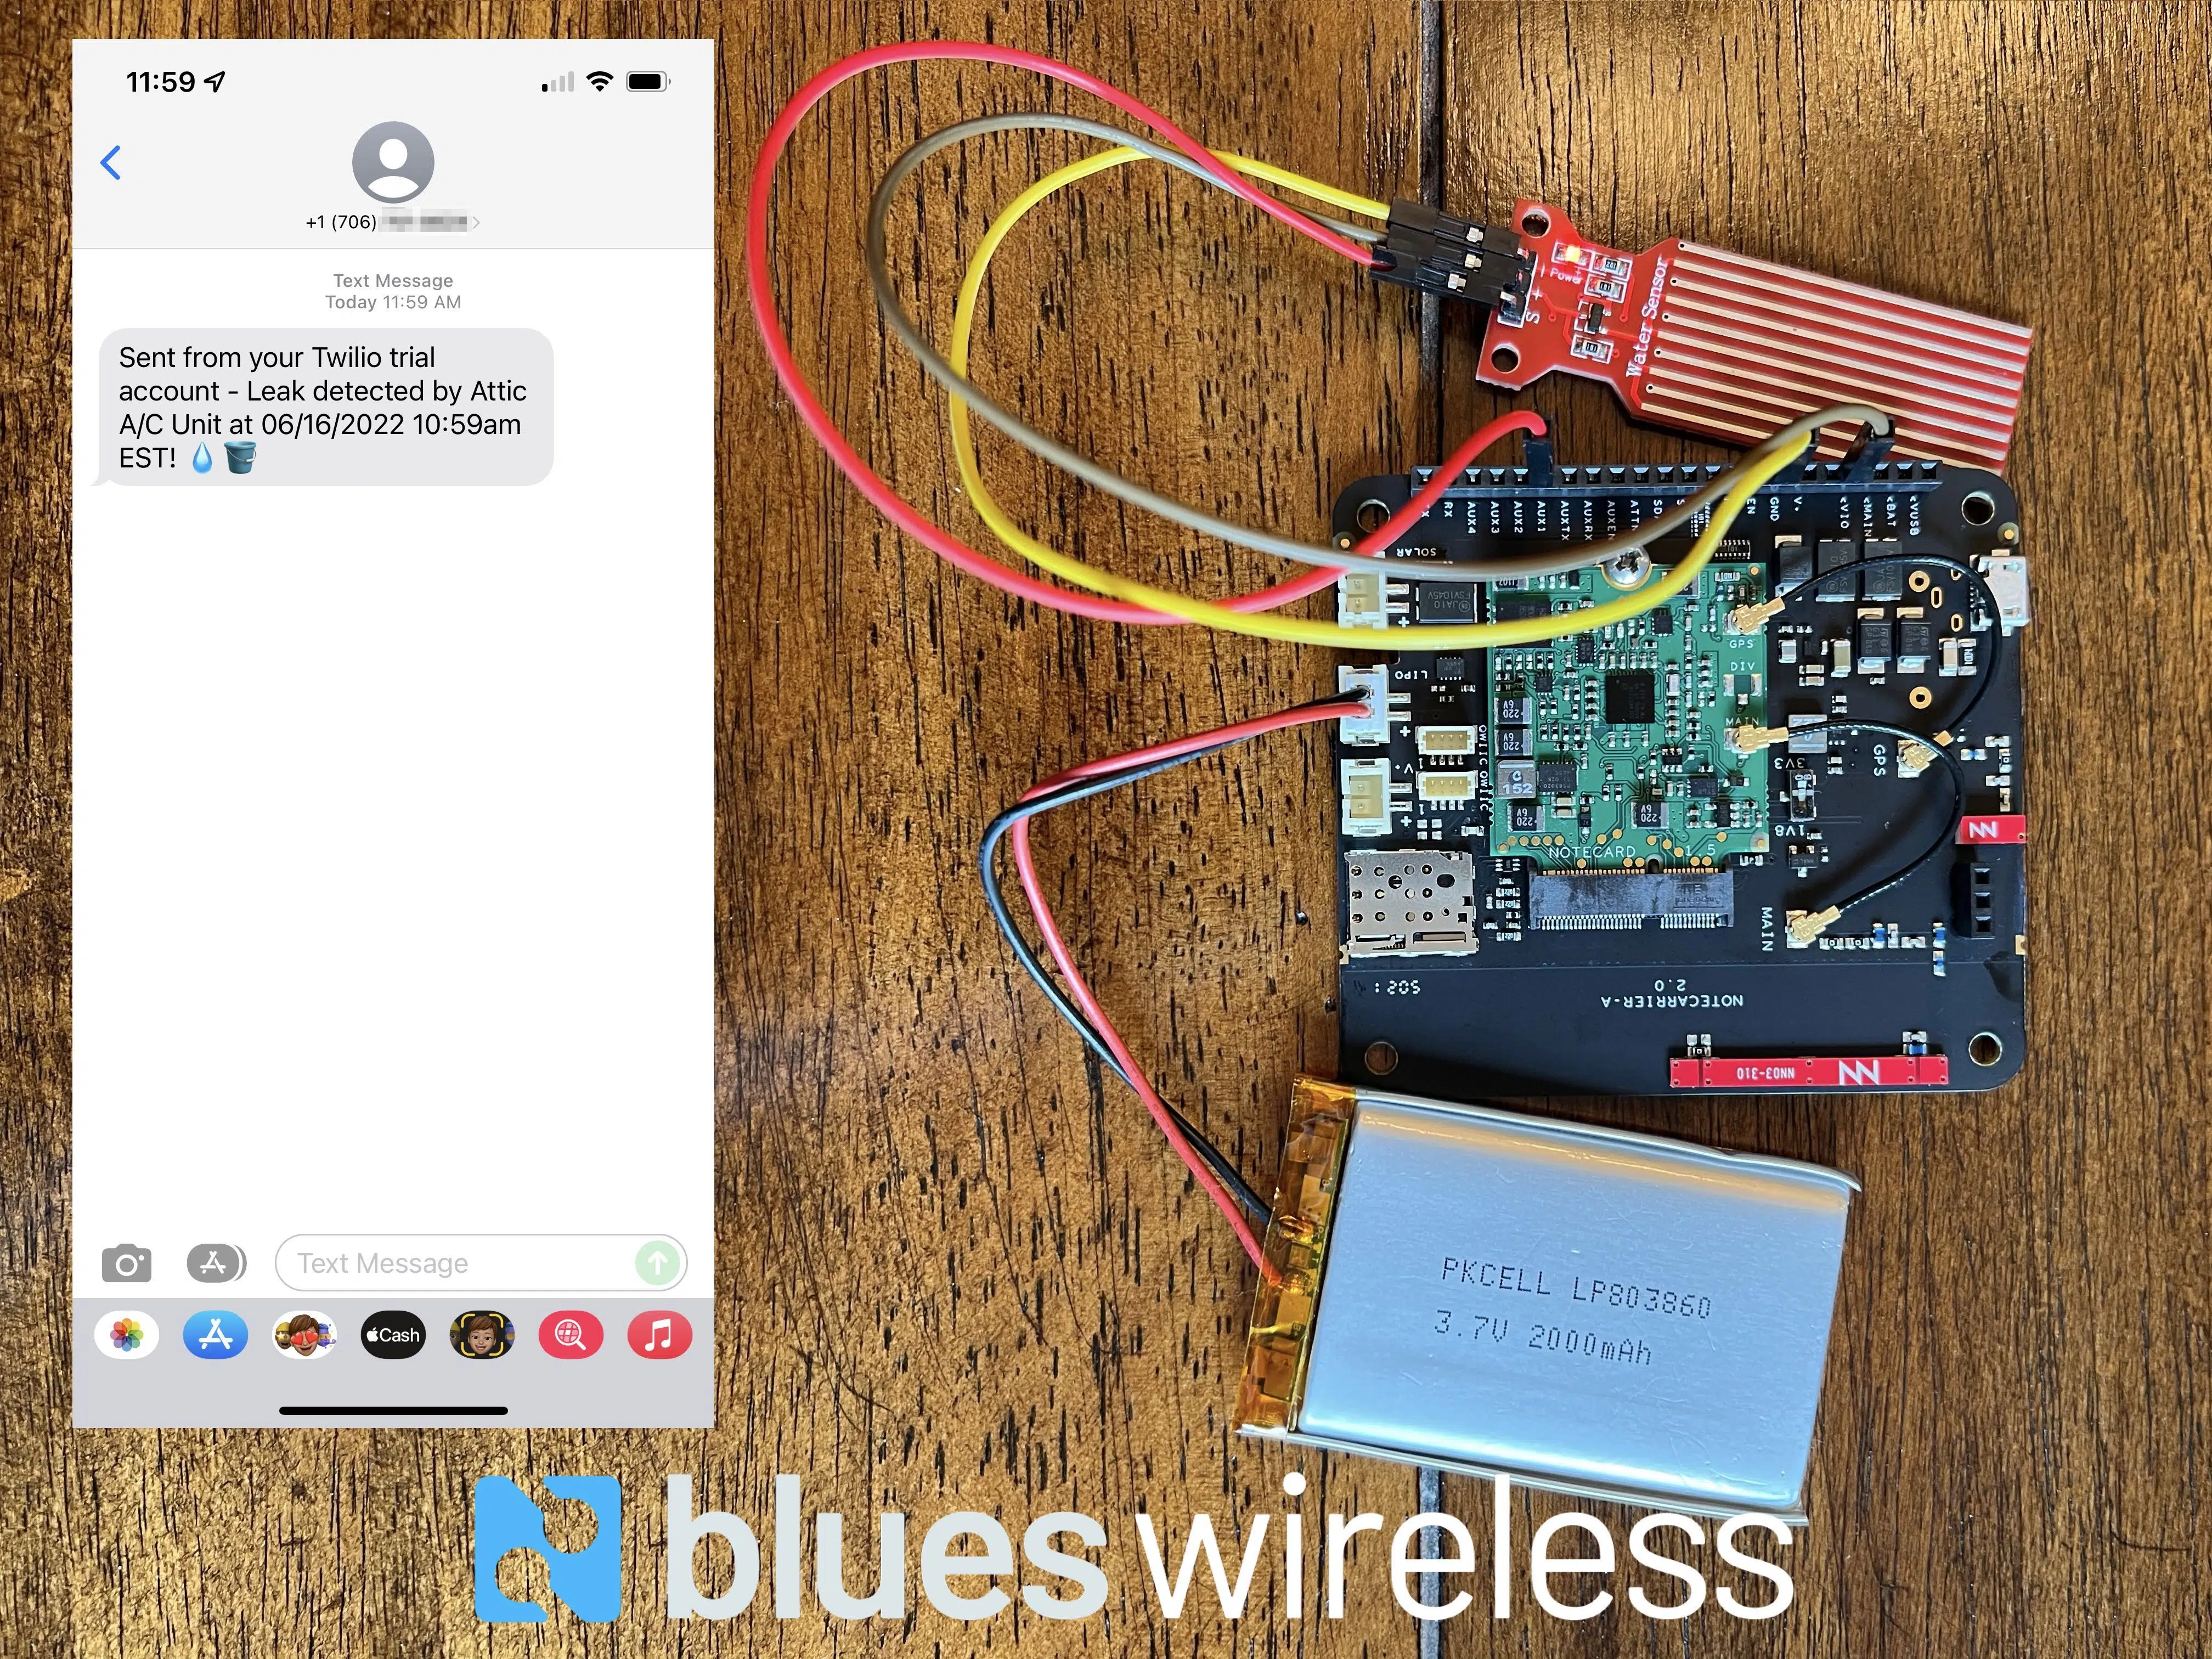 Leak detector device and SMS alerts message